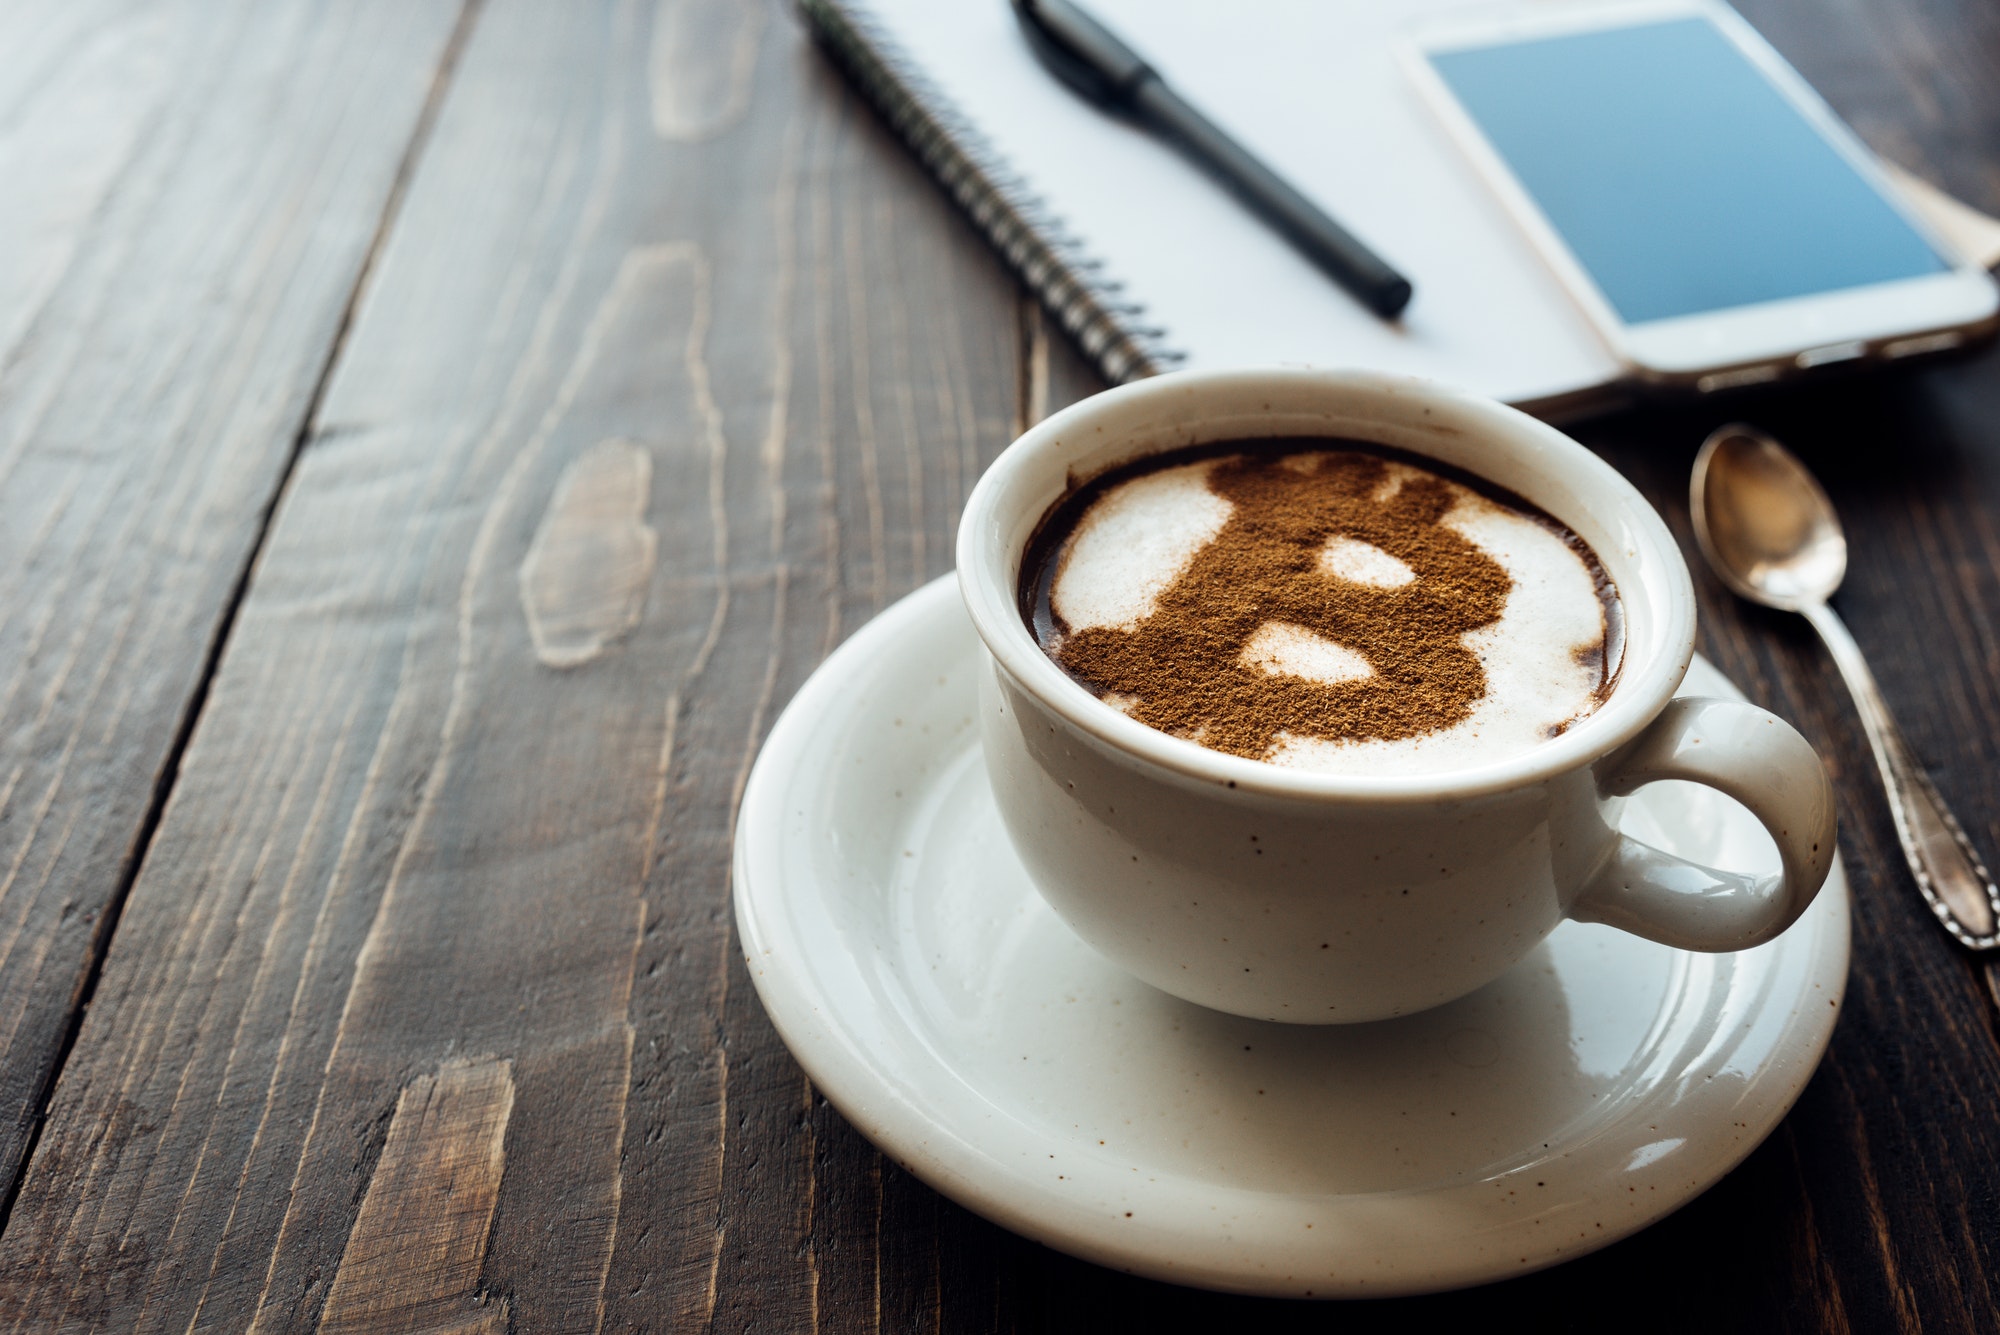 Cup of coffee with bitcoin symbol on milk foam